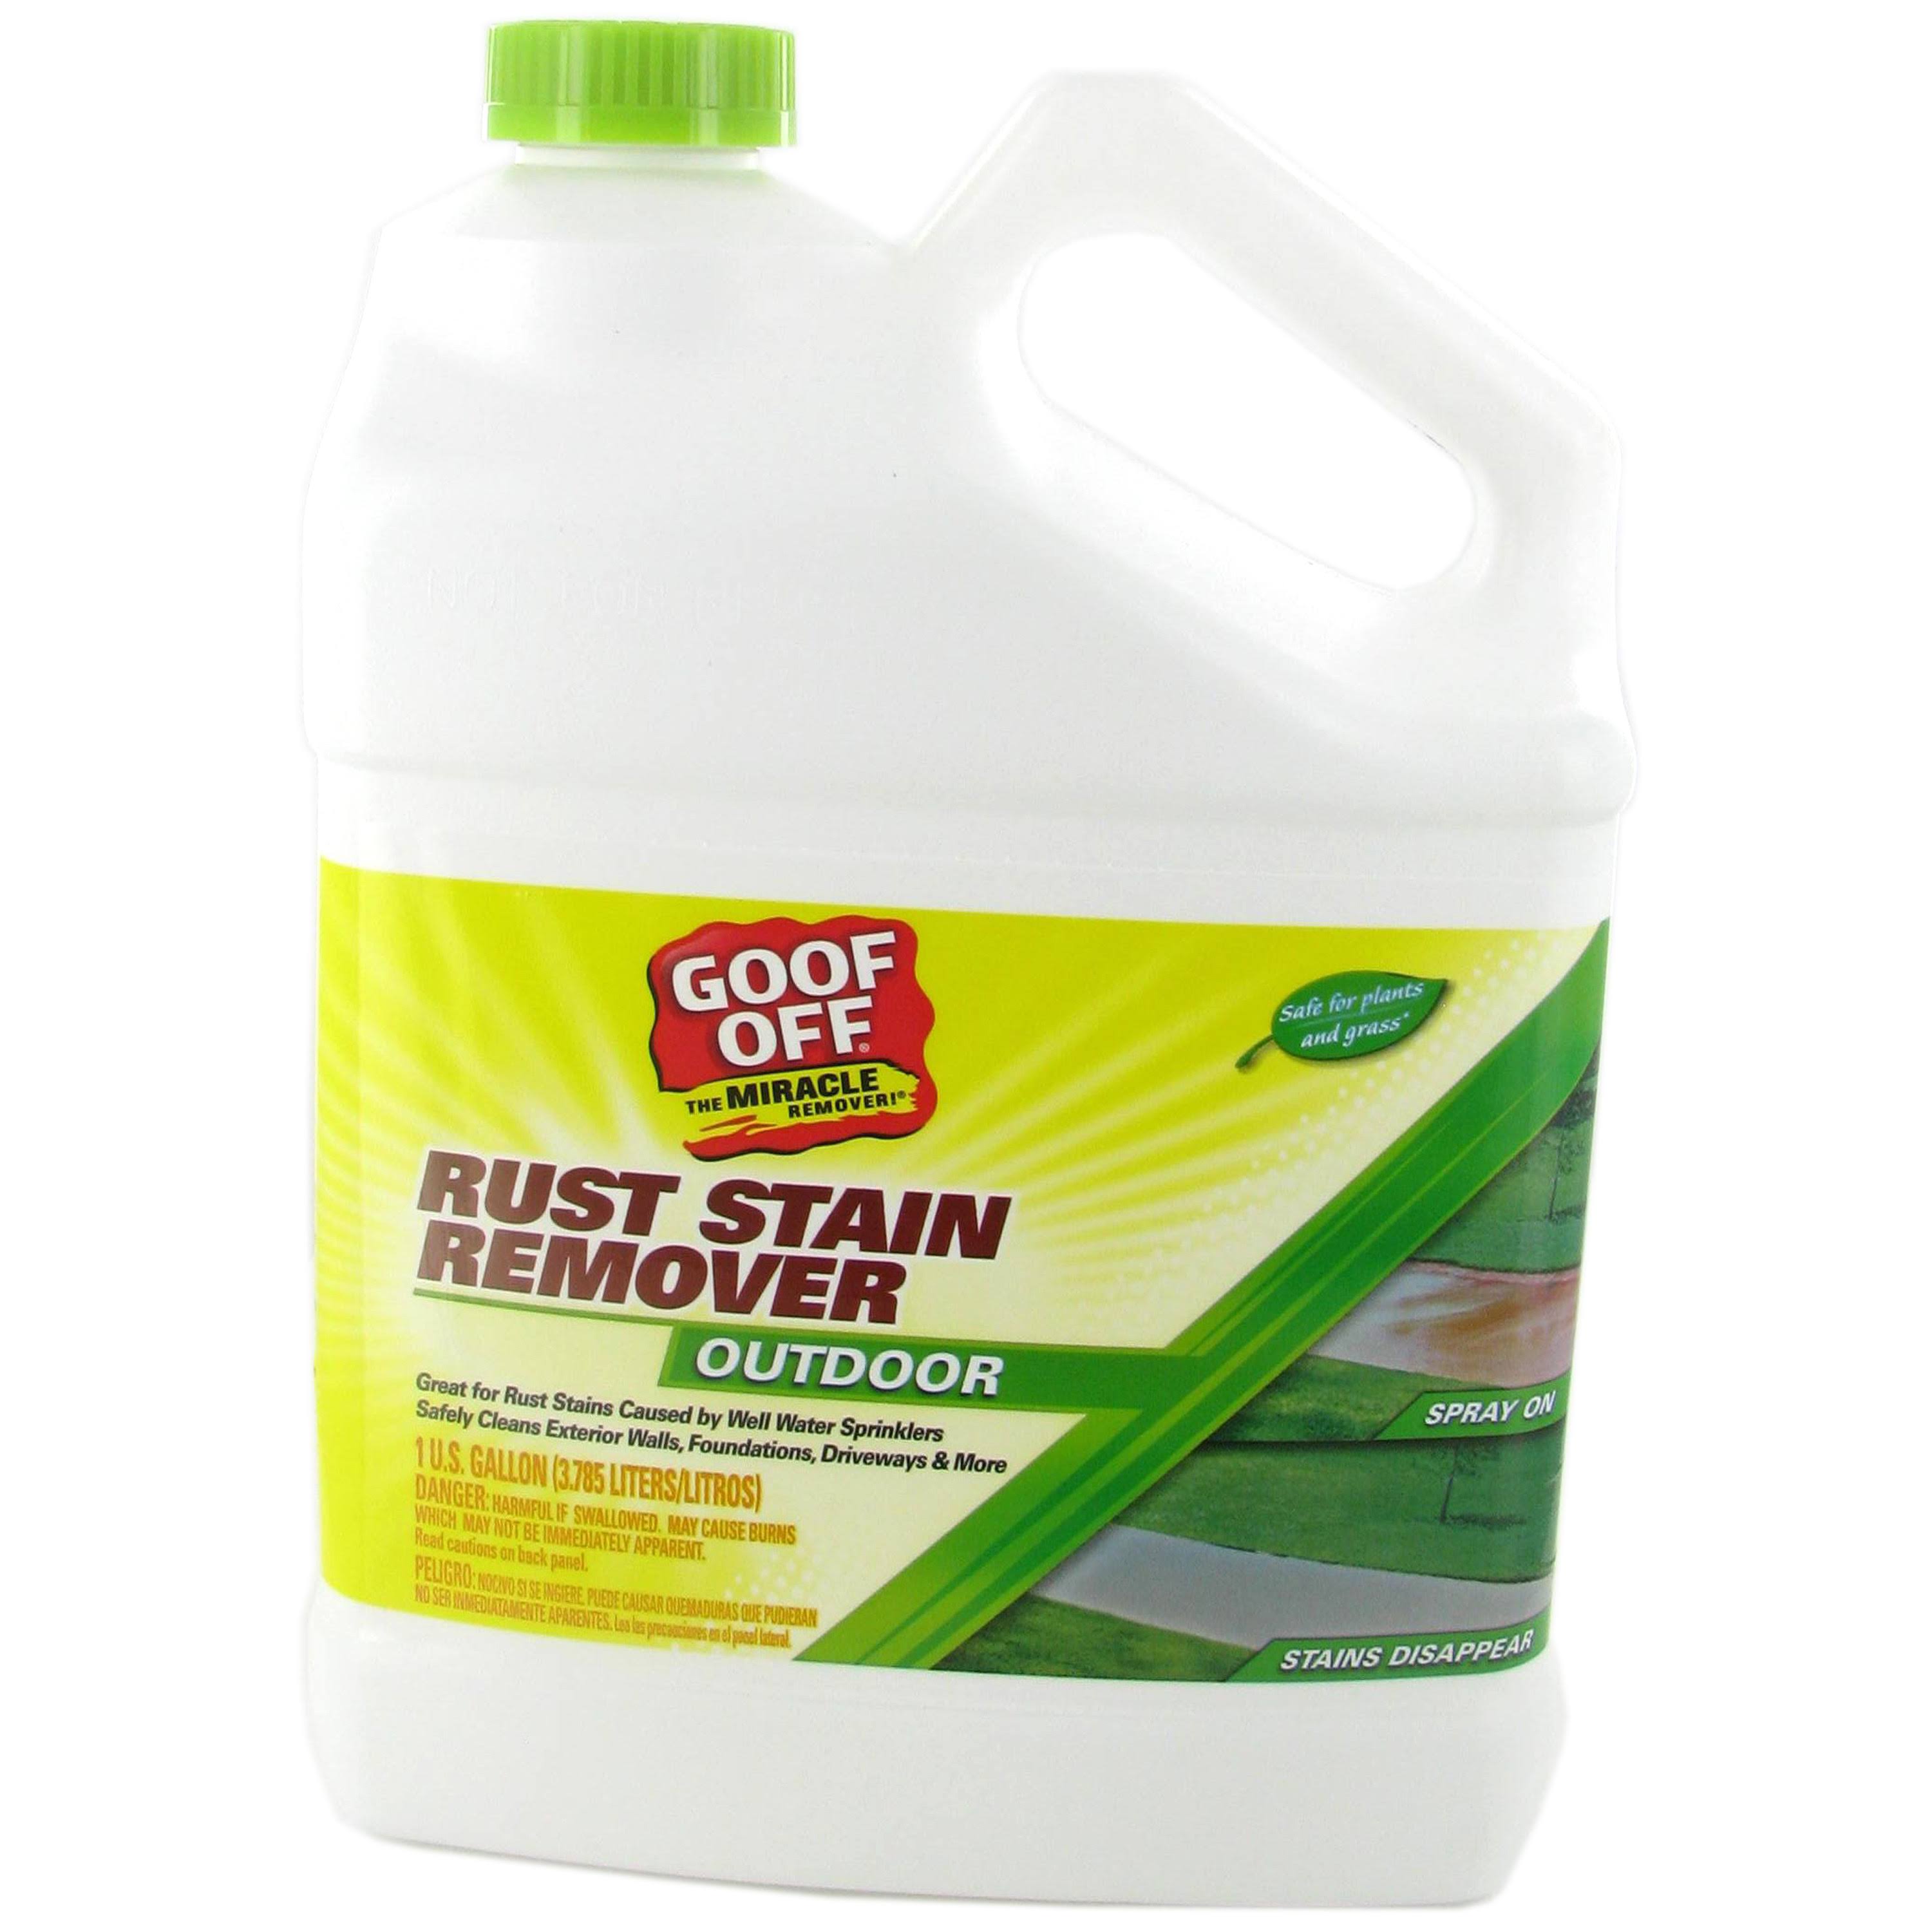 Goof Off Rust Stain Remover - 1 gal